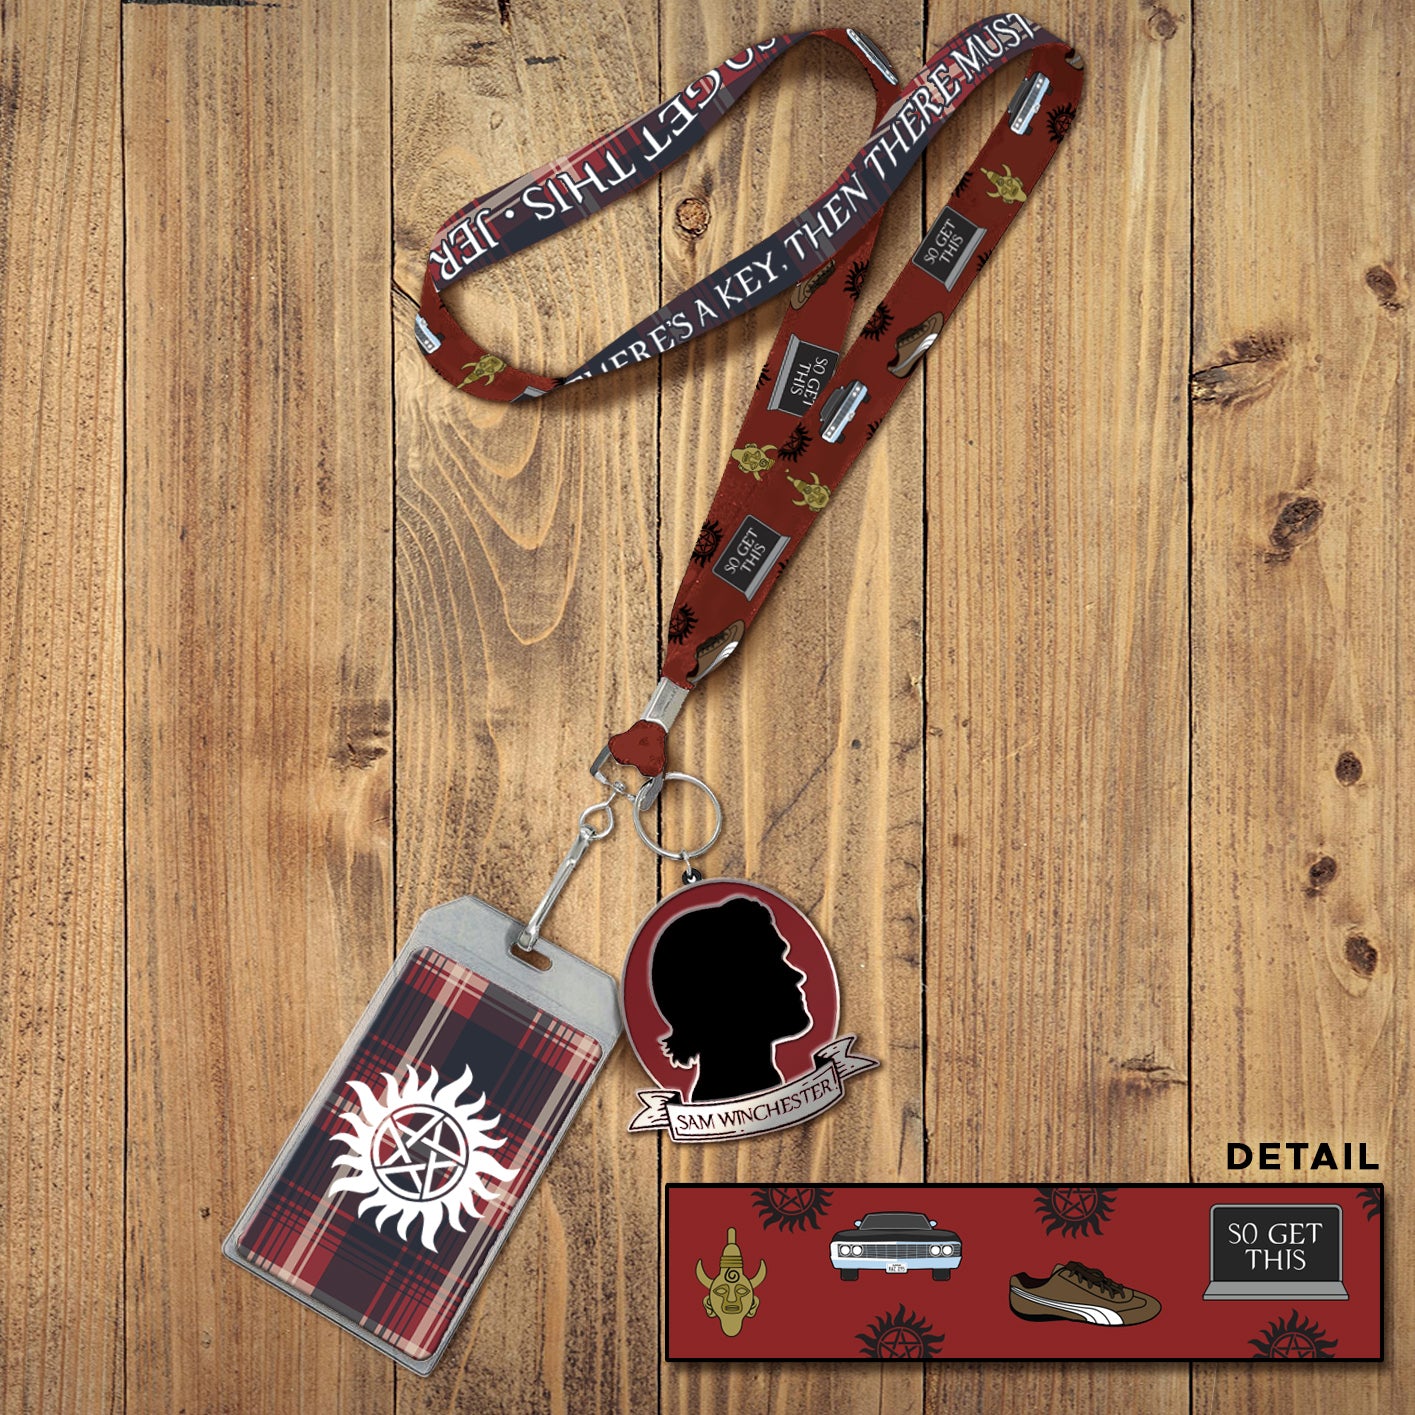 A red plaid landyard with white text saying "always keep fighting." Attached to the landyard is a pendant with Sam Winchester's face in silhouette. Behind the lanyard is a wooden table. In the bottom right corner is an inset image showing details of the strap, including drawings of a Samulet, a shoe, the anti-possession symbol, and a black Chevy Impala.